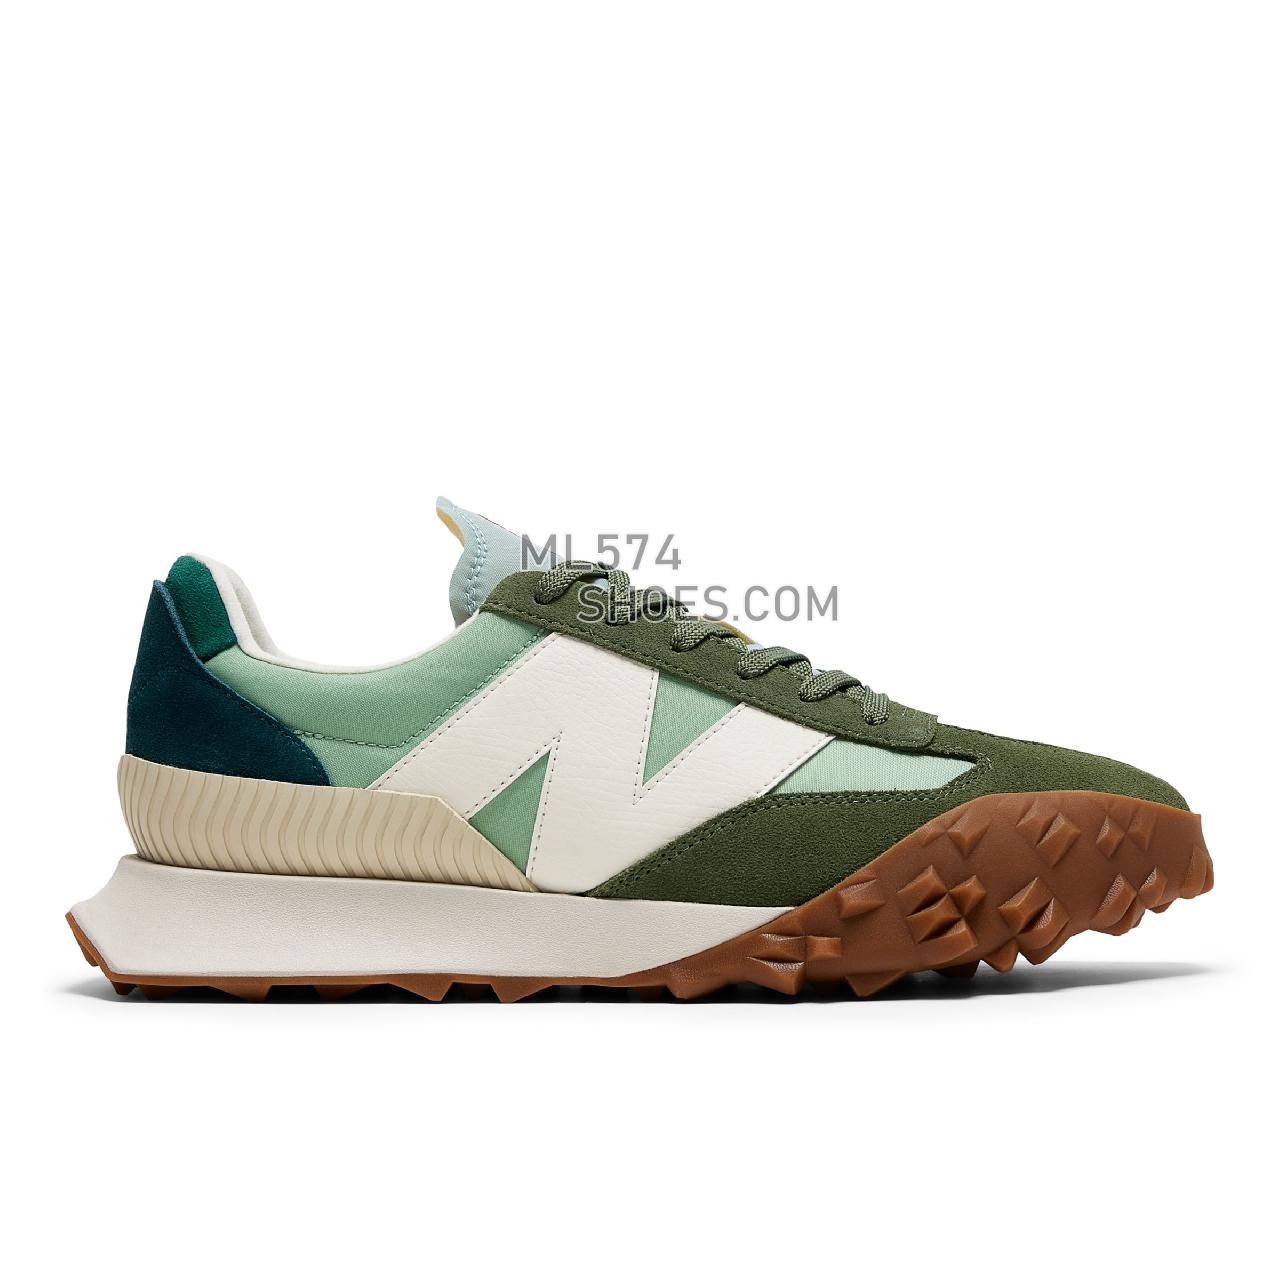 New Balance XC-72 - Unisex Men's Women's Sport Style Sneakers - Dry Sage with Norway Spruce - UXC72OU1